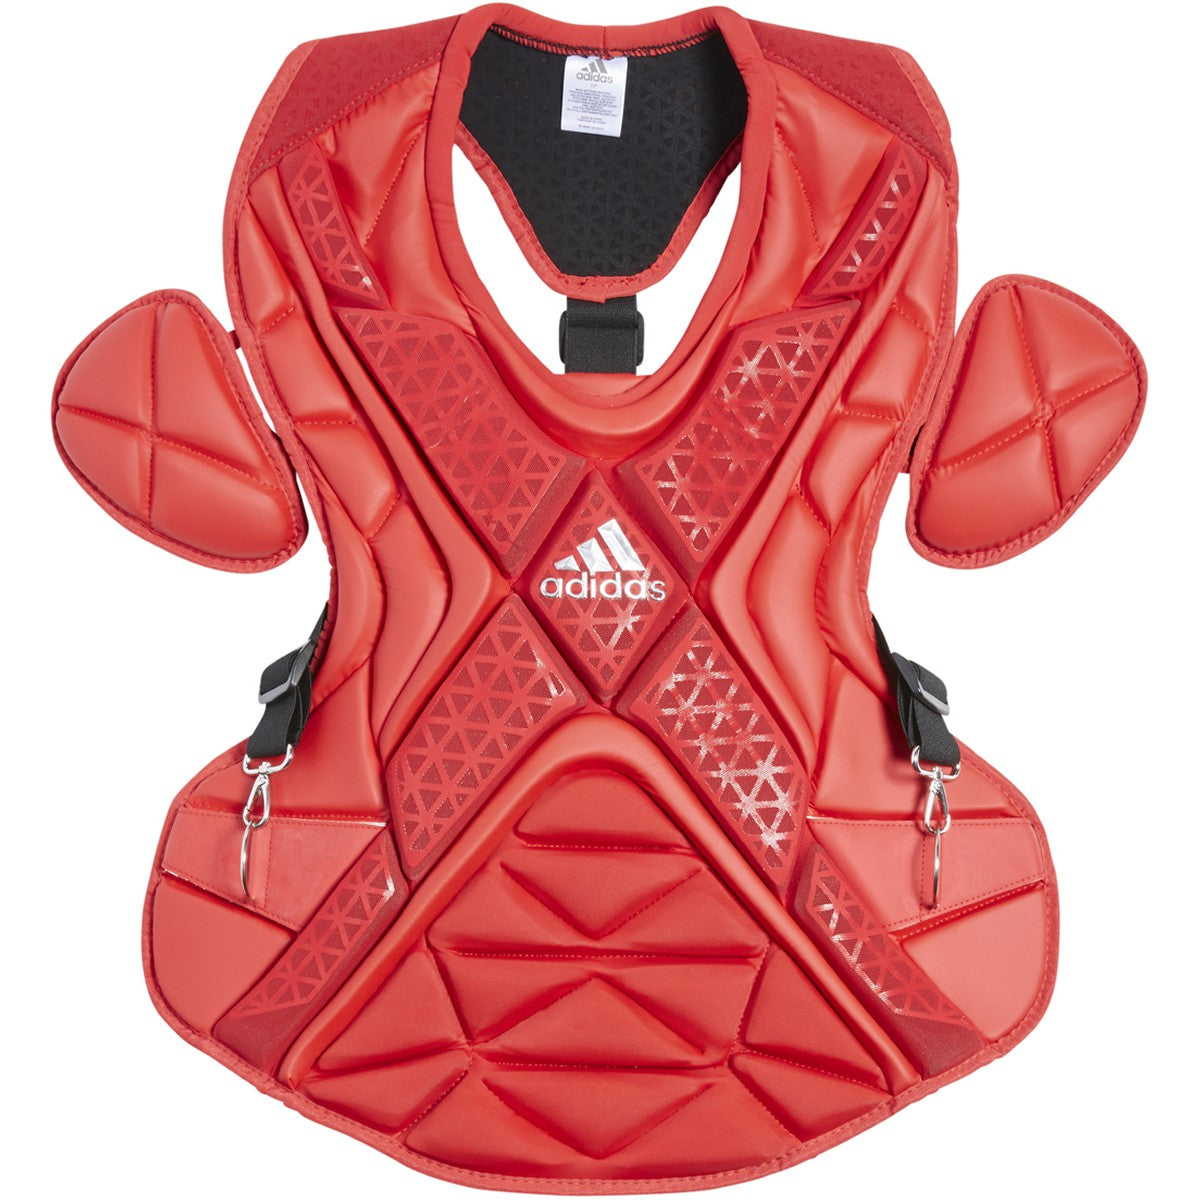 adidas pro series catcher's chest protector 2.0